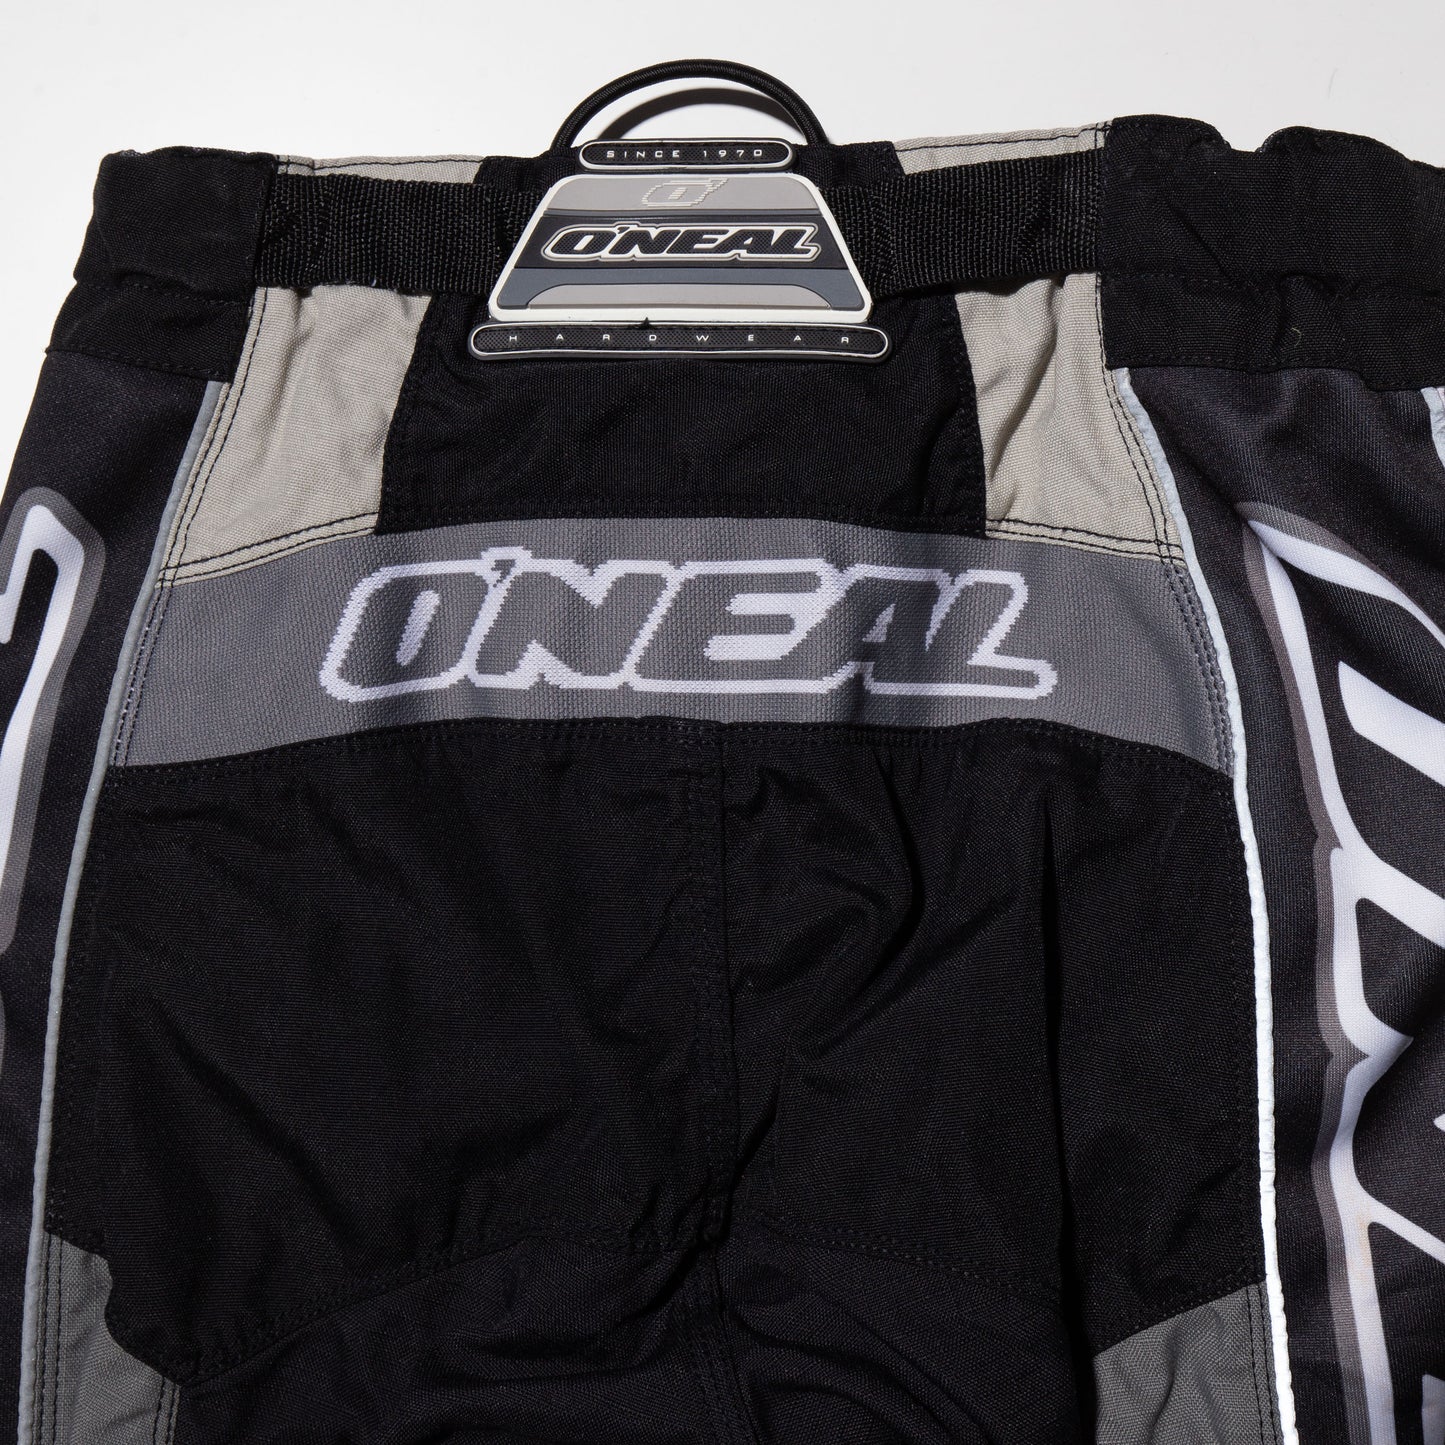 vintage oneal motocross trousers